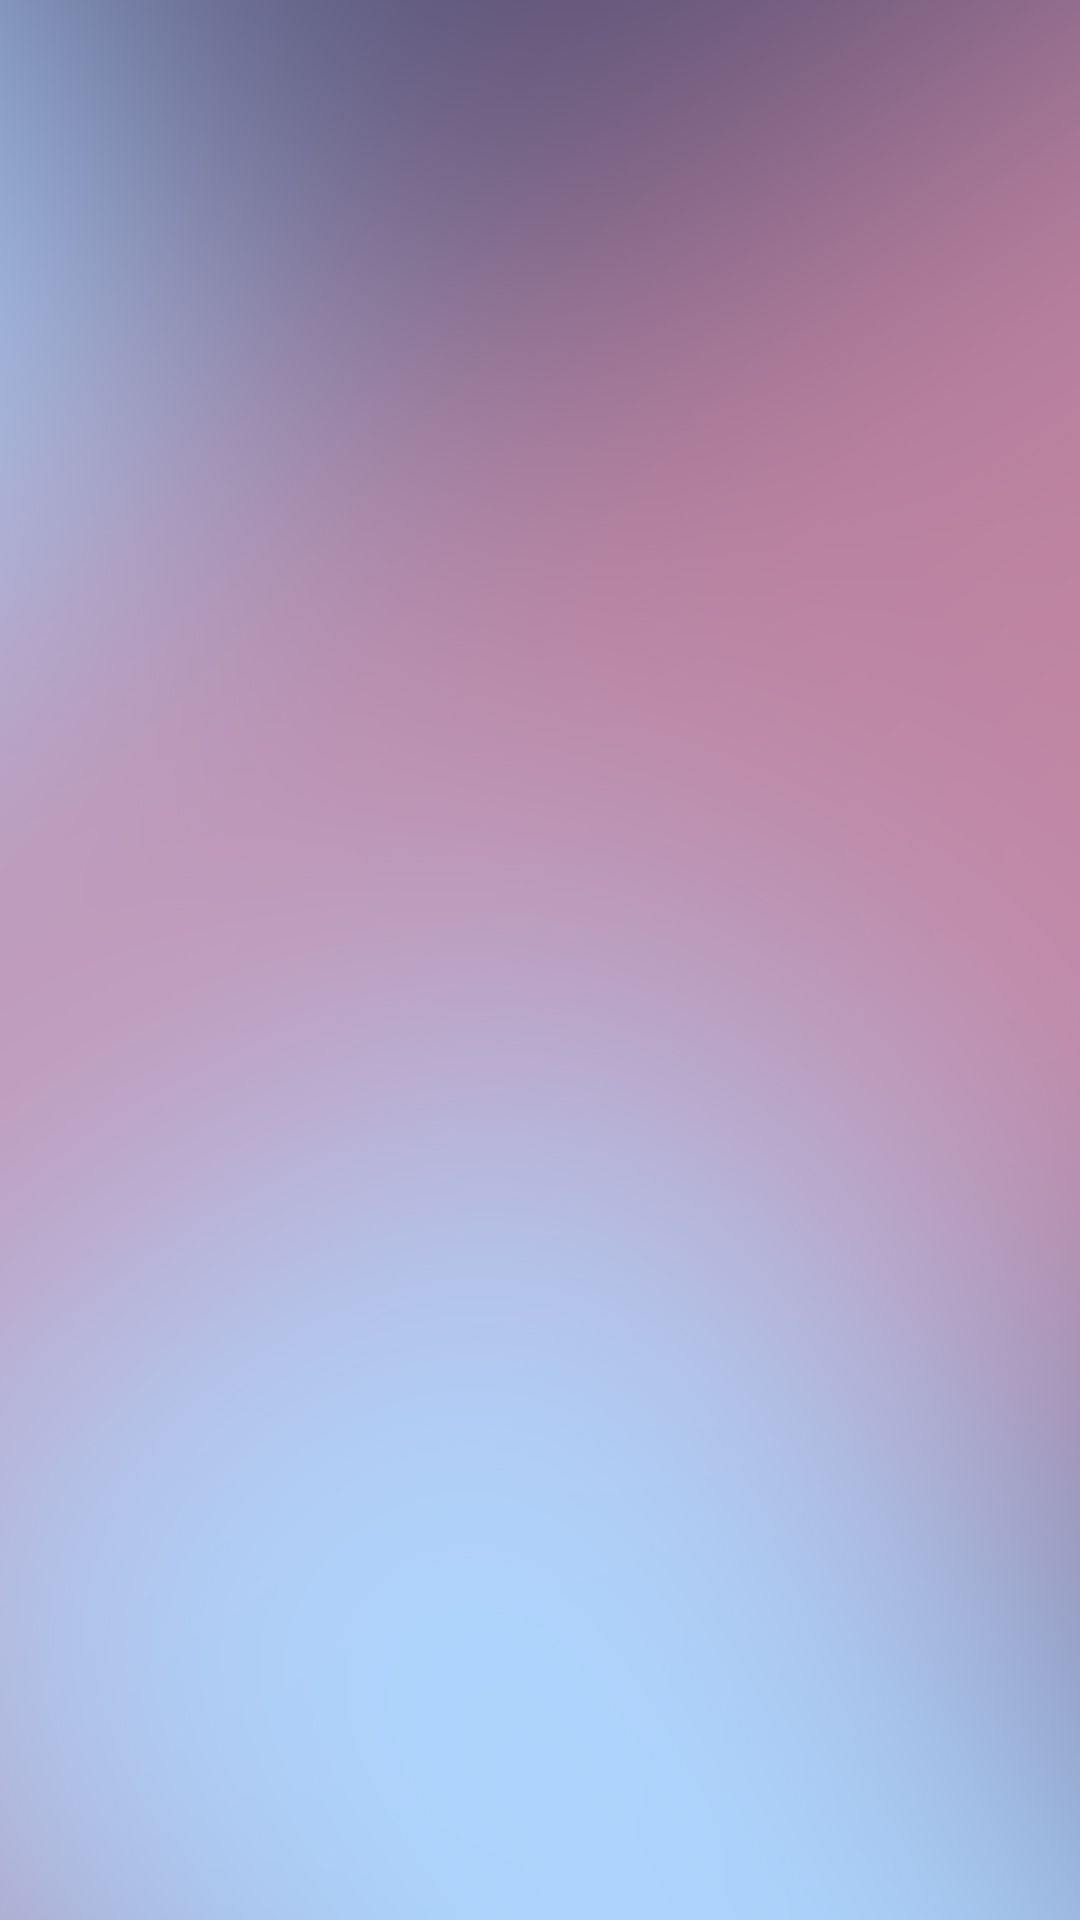 Gallery Blurry Abstract Colorful Background Mobile Hd Wallpaper 3. Pink Wallpaper Iphone, Pink Mountains, Blurred Background